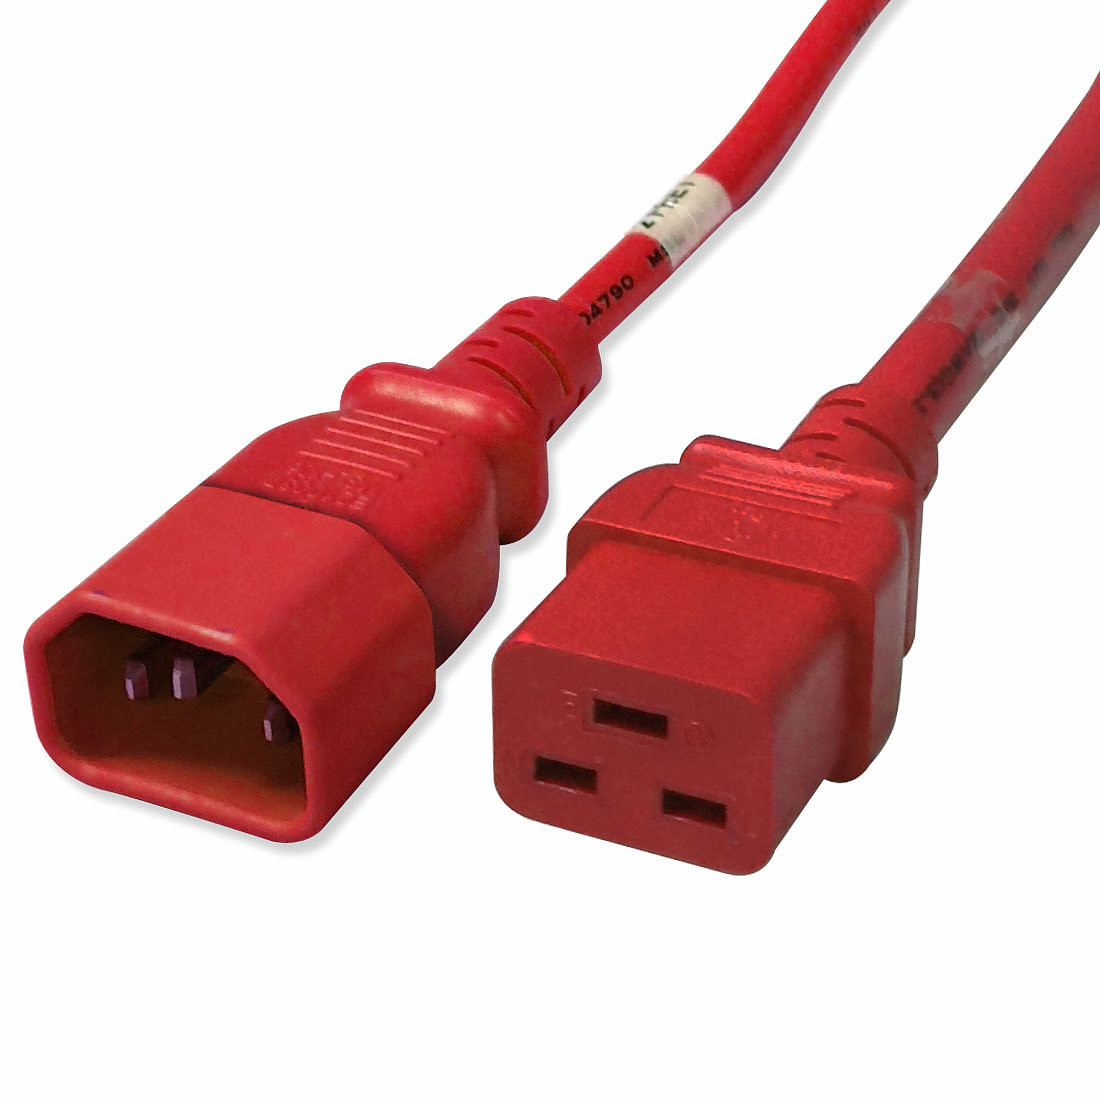 C14 to C19 Power Cable - 6ft Red 15Amp Power Cord